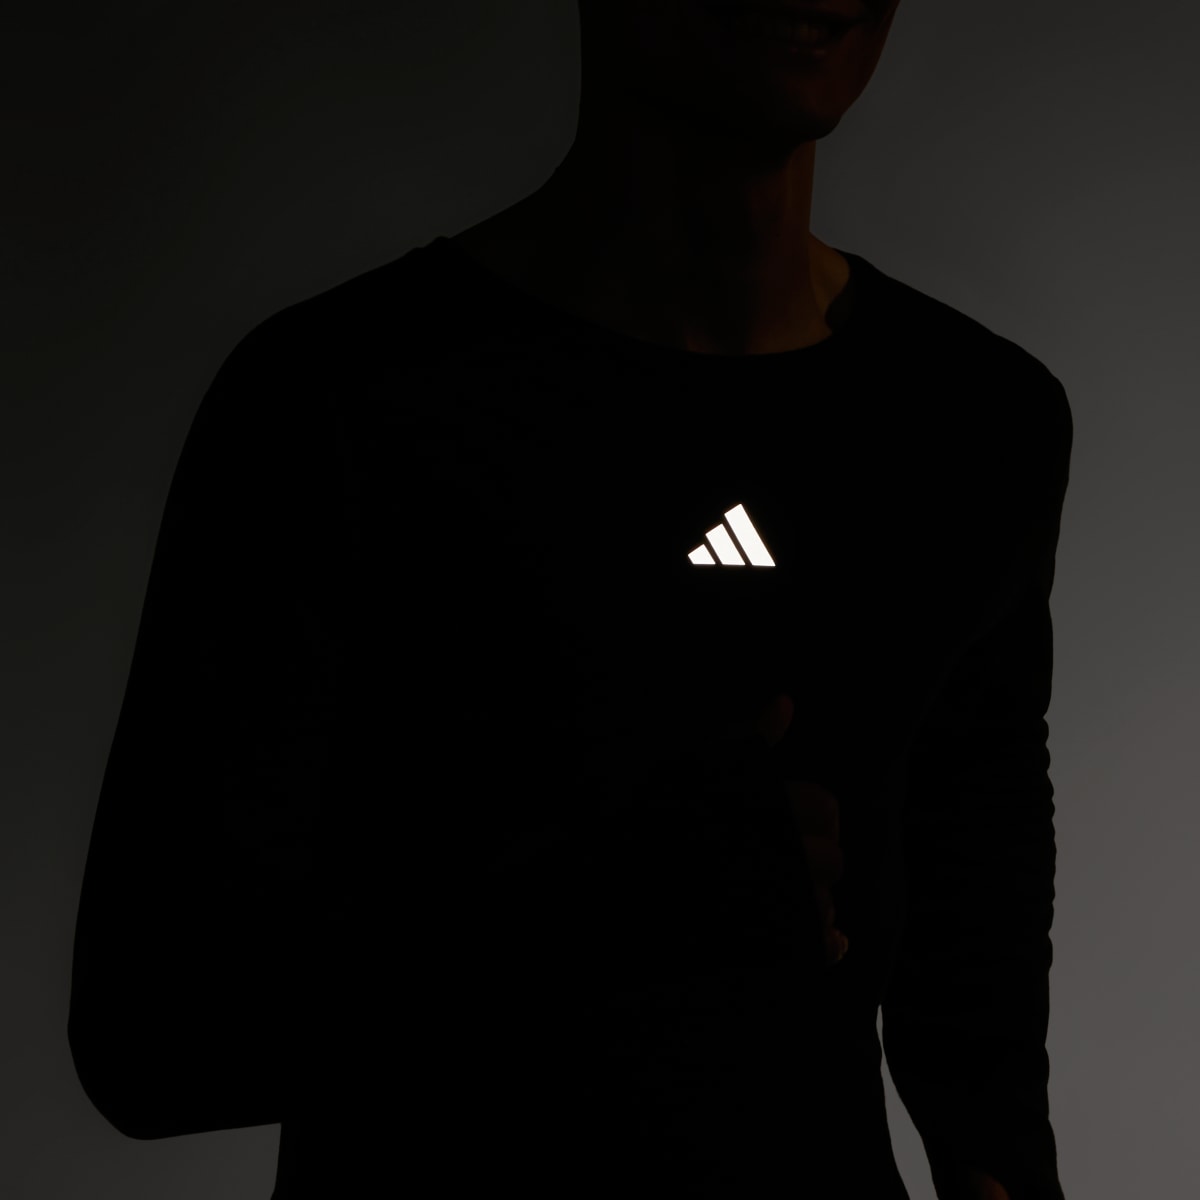 Adidas Ultimate Running Conquer the Elements Merino Long Sleeve Shirt. 8